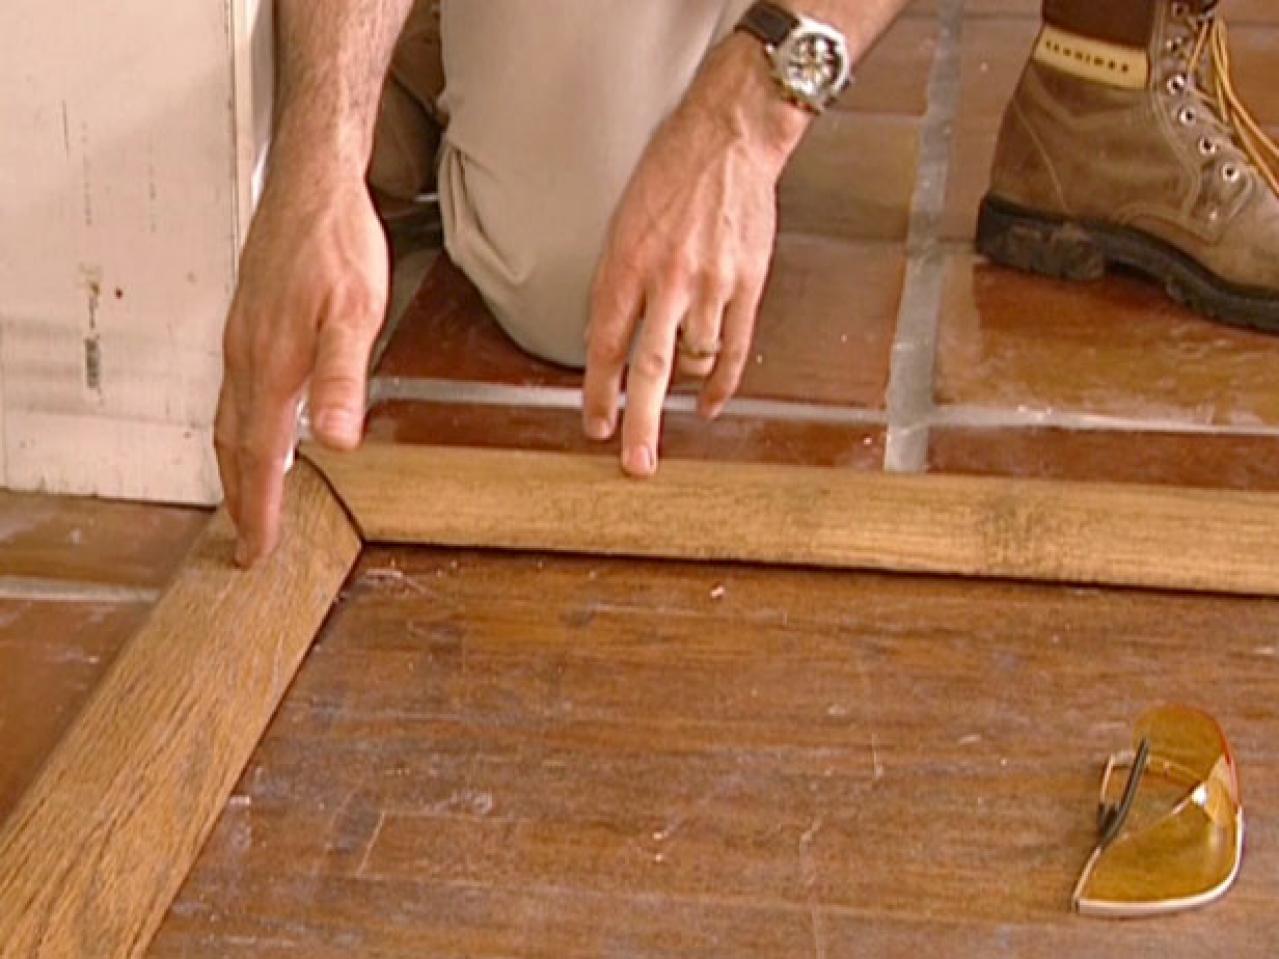 How To Install A Tile Floor Transition, How To Install Carpet Trim On Tile Floor